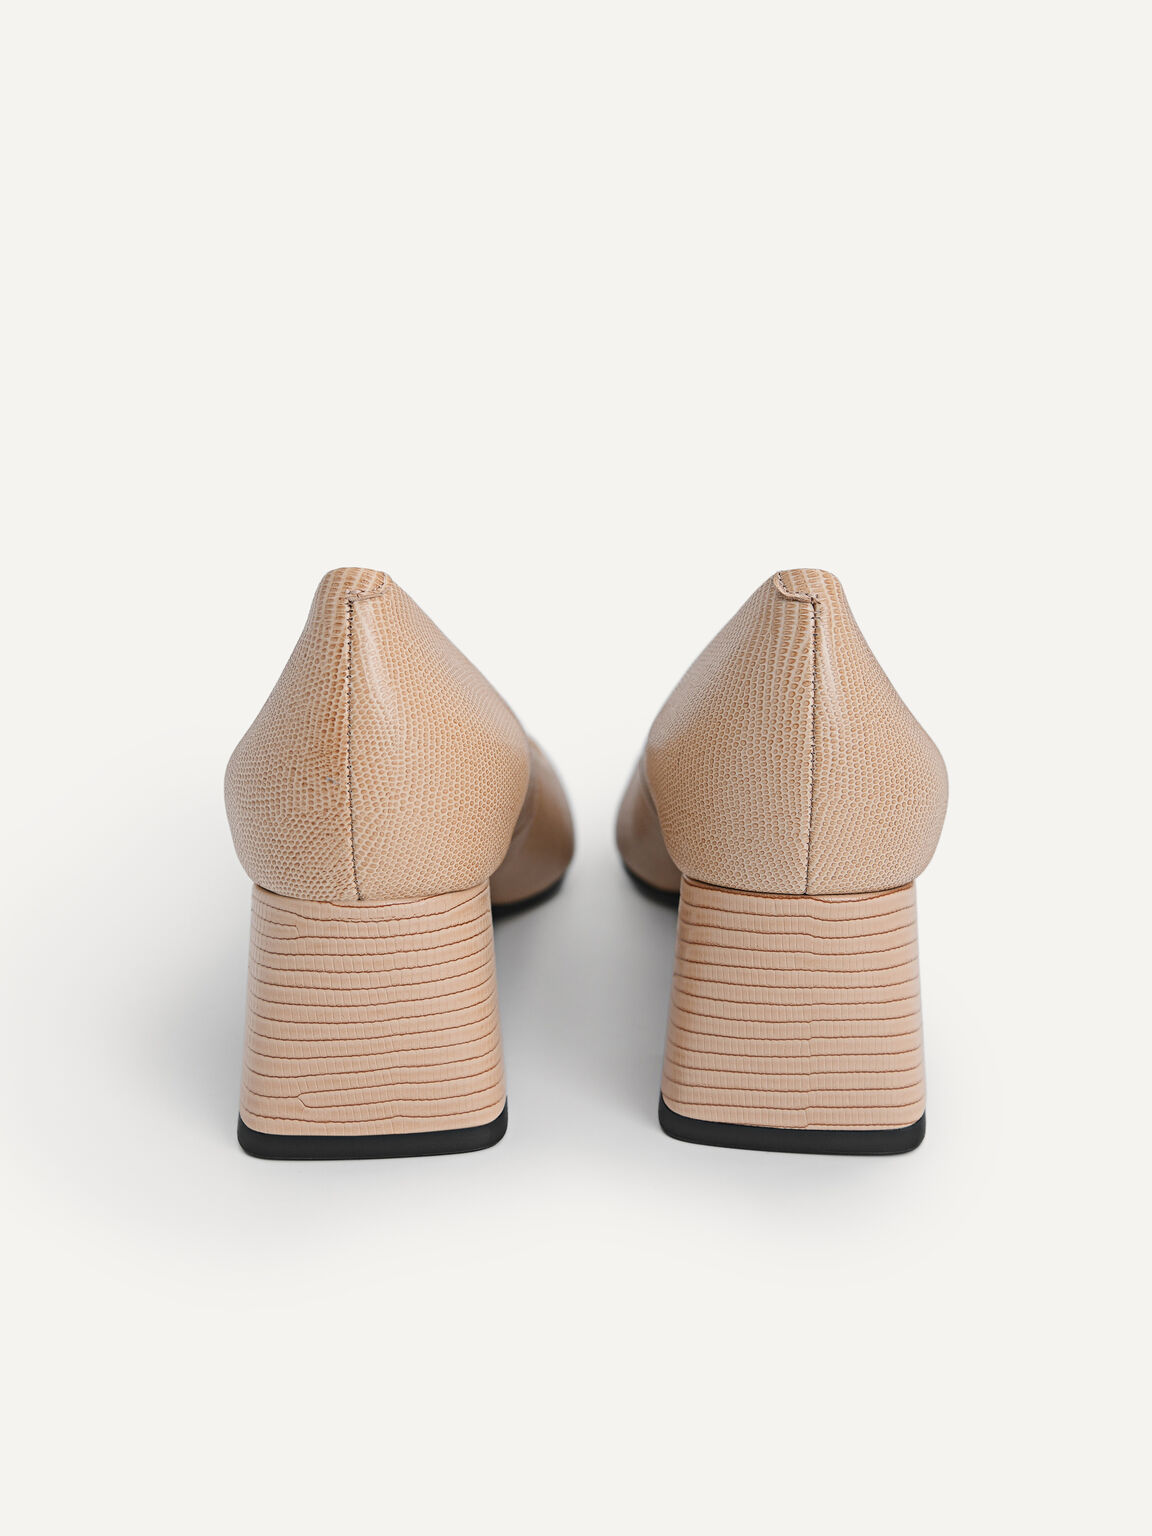 Lizard-Effect Leather Pointed Toe Pumps, Nude